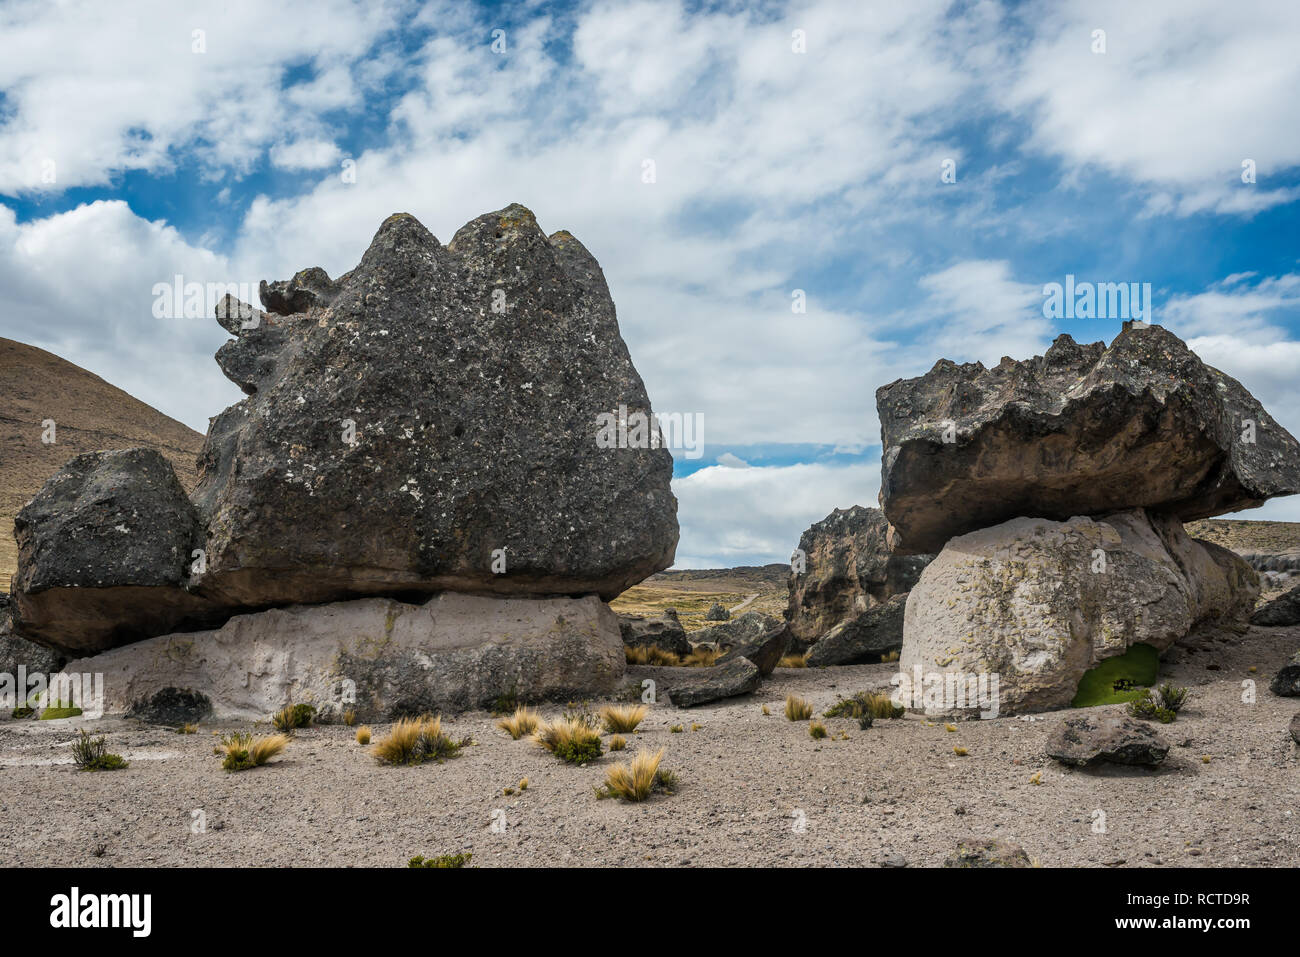 Imata Stone Forest in the peruvian Andes at Arequipa Peru Stock Photo